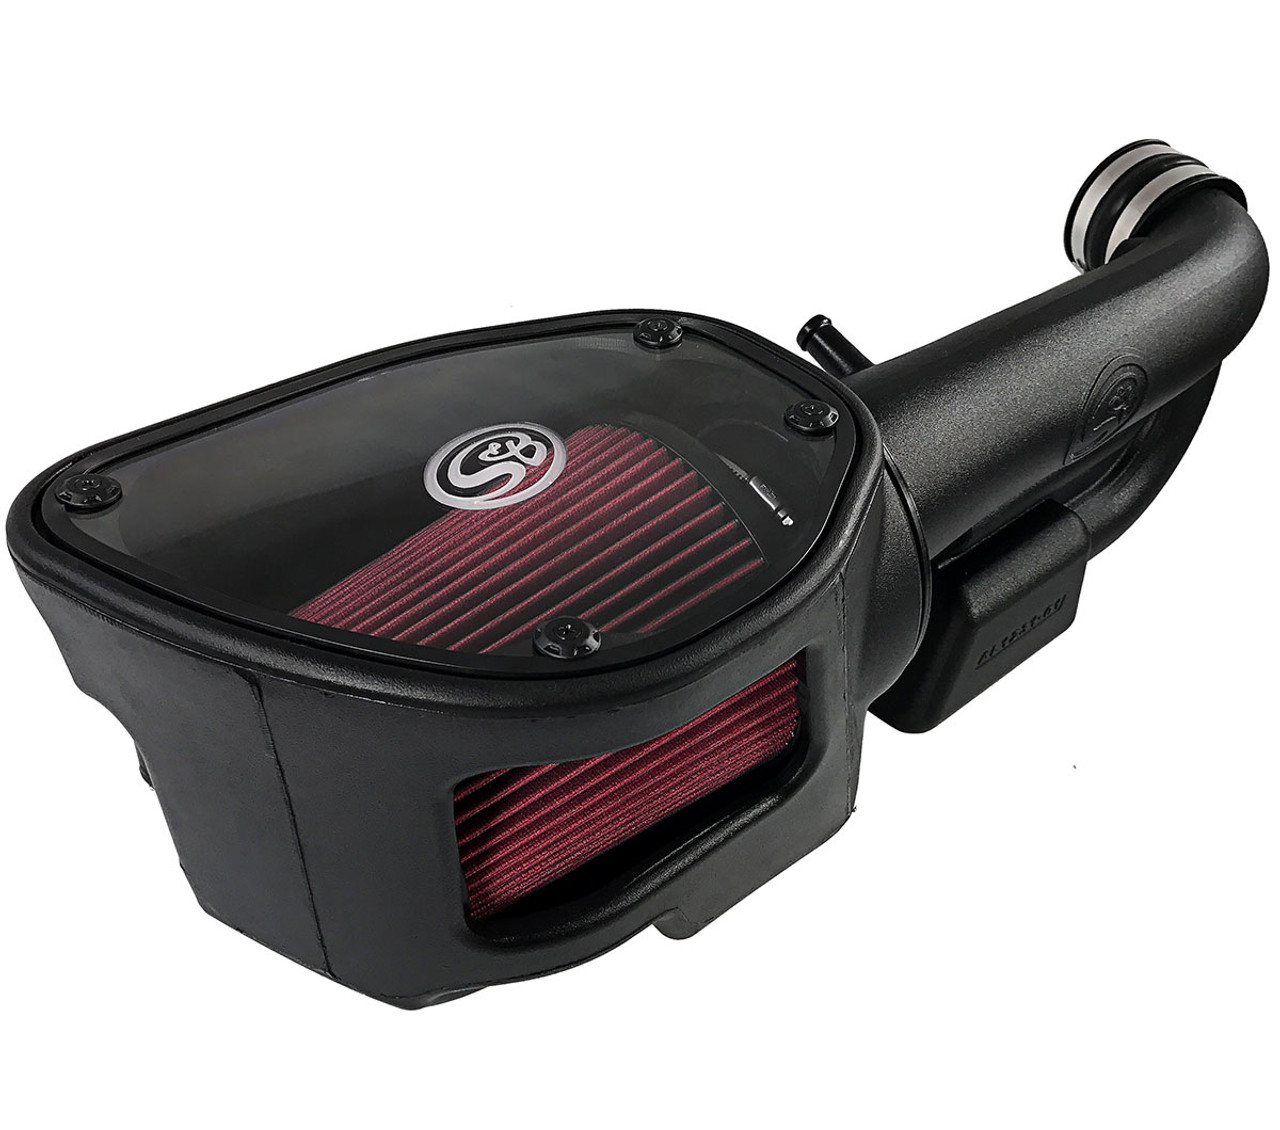 S&B COLD AIR INTAKE FOR 2012-2018 JEEP WRANGLER JK 3.6L 75-5060 OILED AIR FILTER - 75-5060